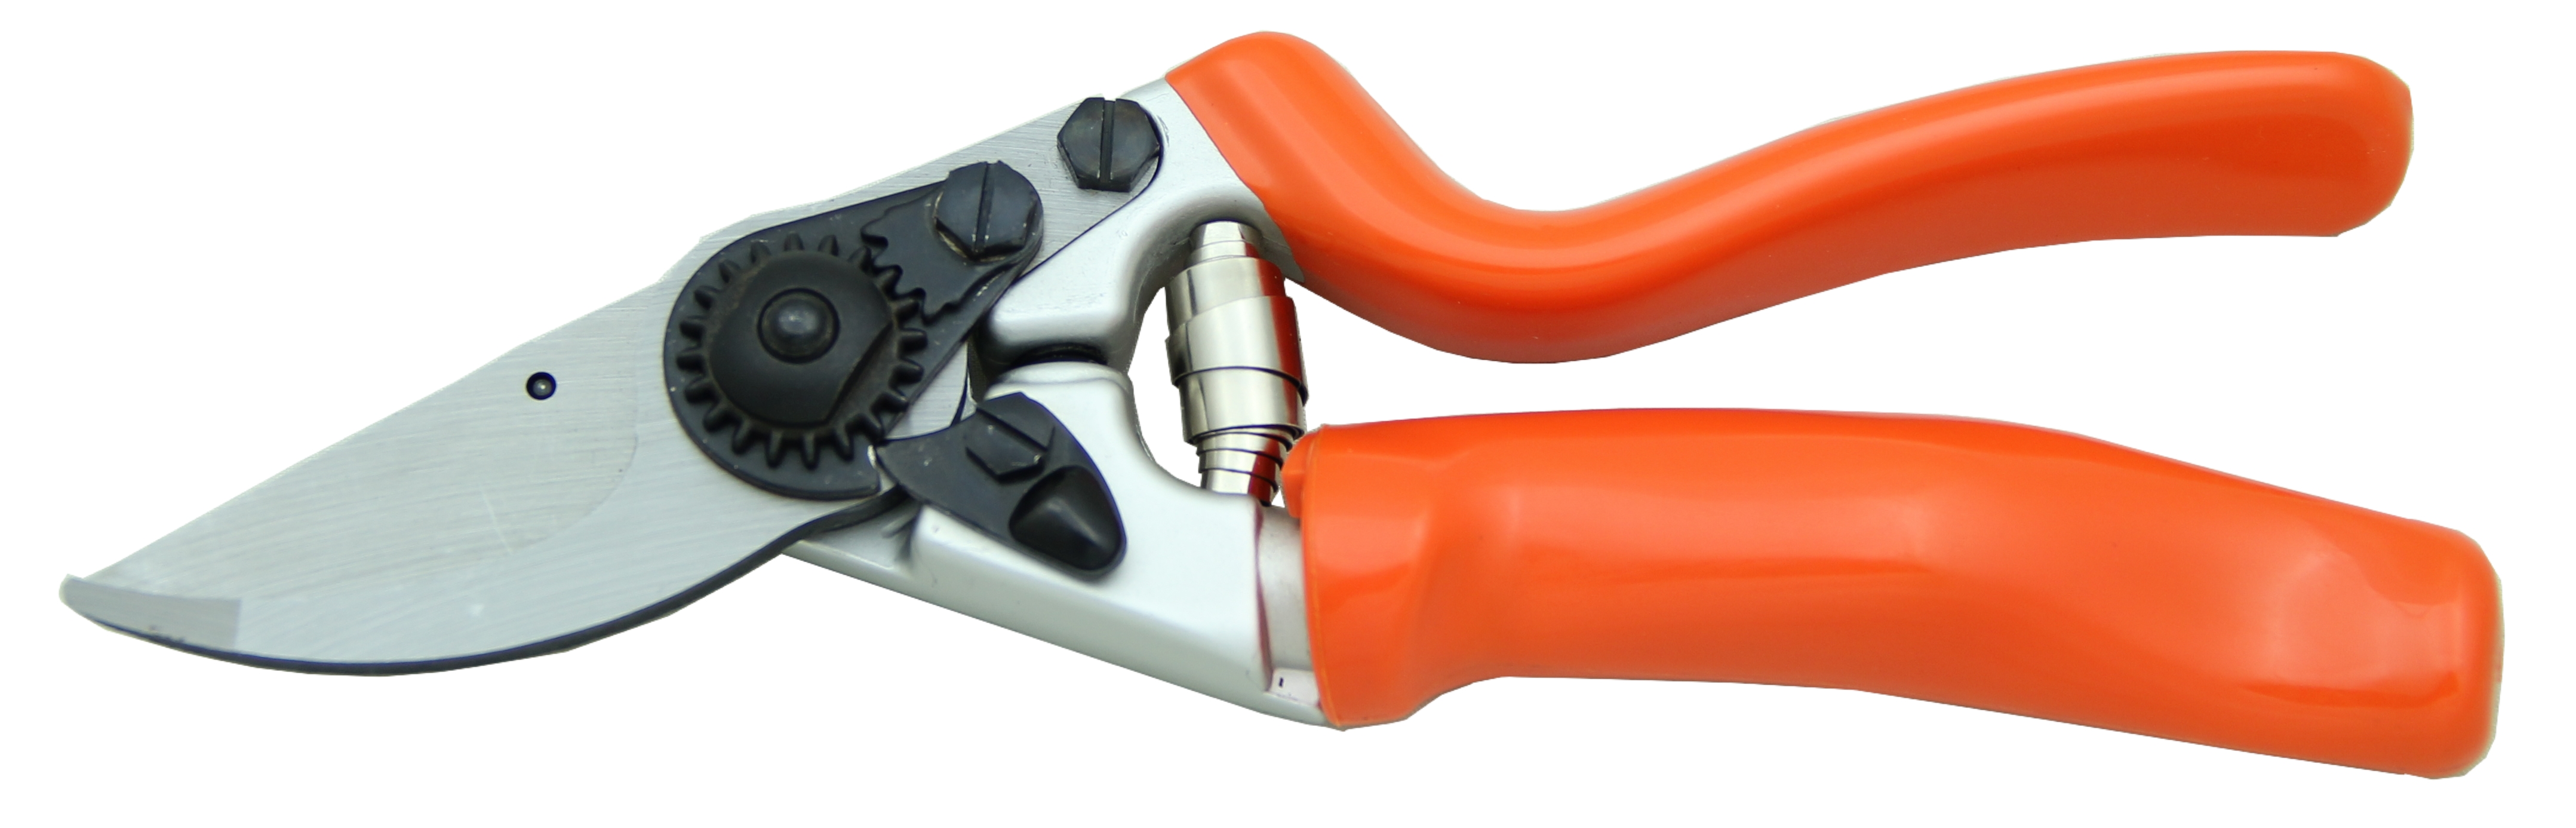 8.25” Drop Forged Bypass Pruner with Rotating Handle (Pruners)